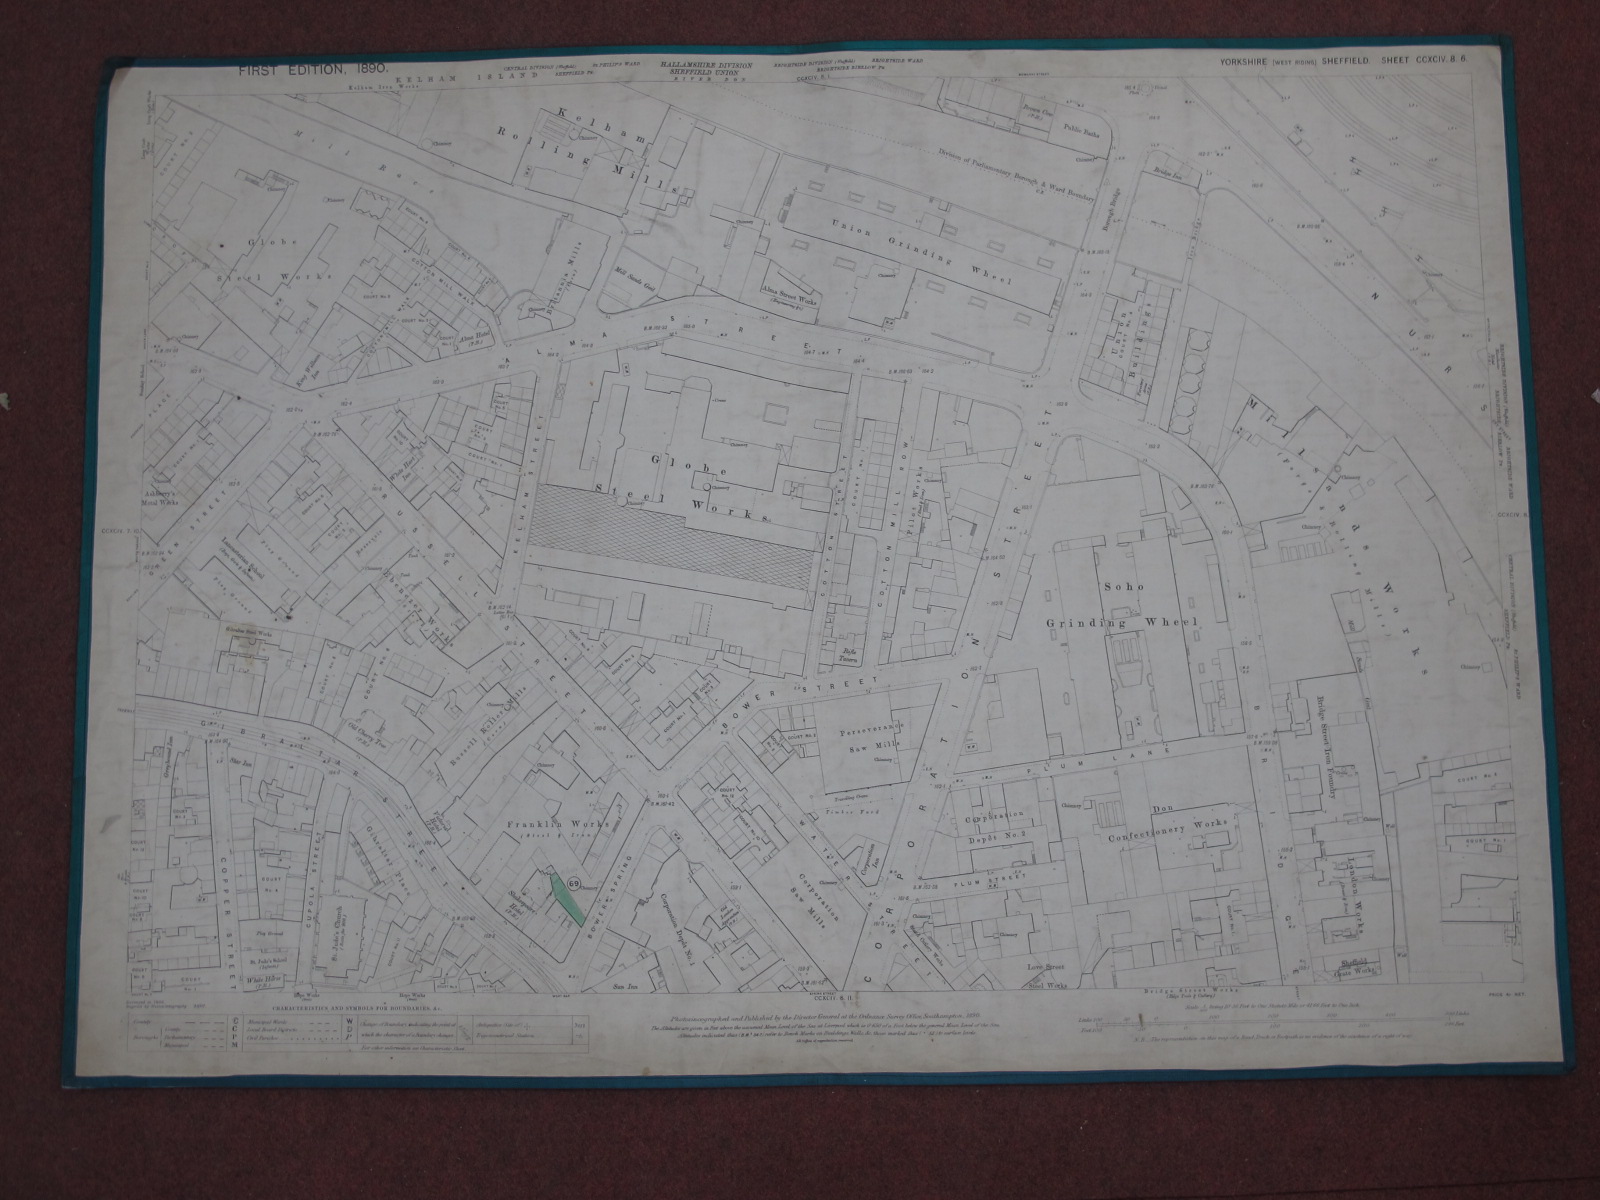 Sheffield Maps, Brightside, Attercliffe - some dates noted 1889, 1891, 1935, various scales, many